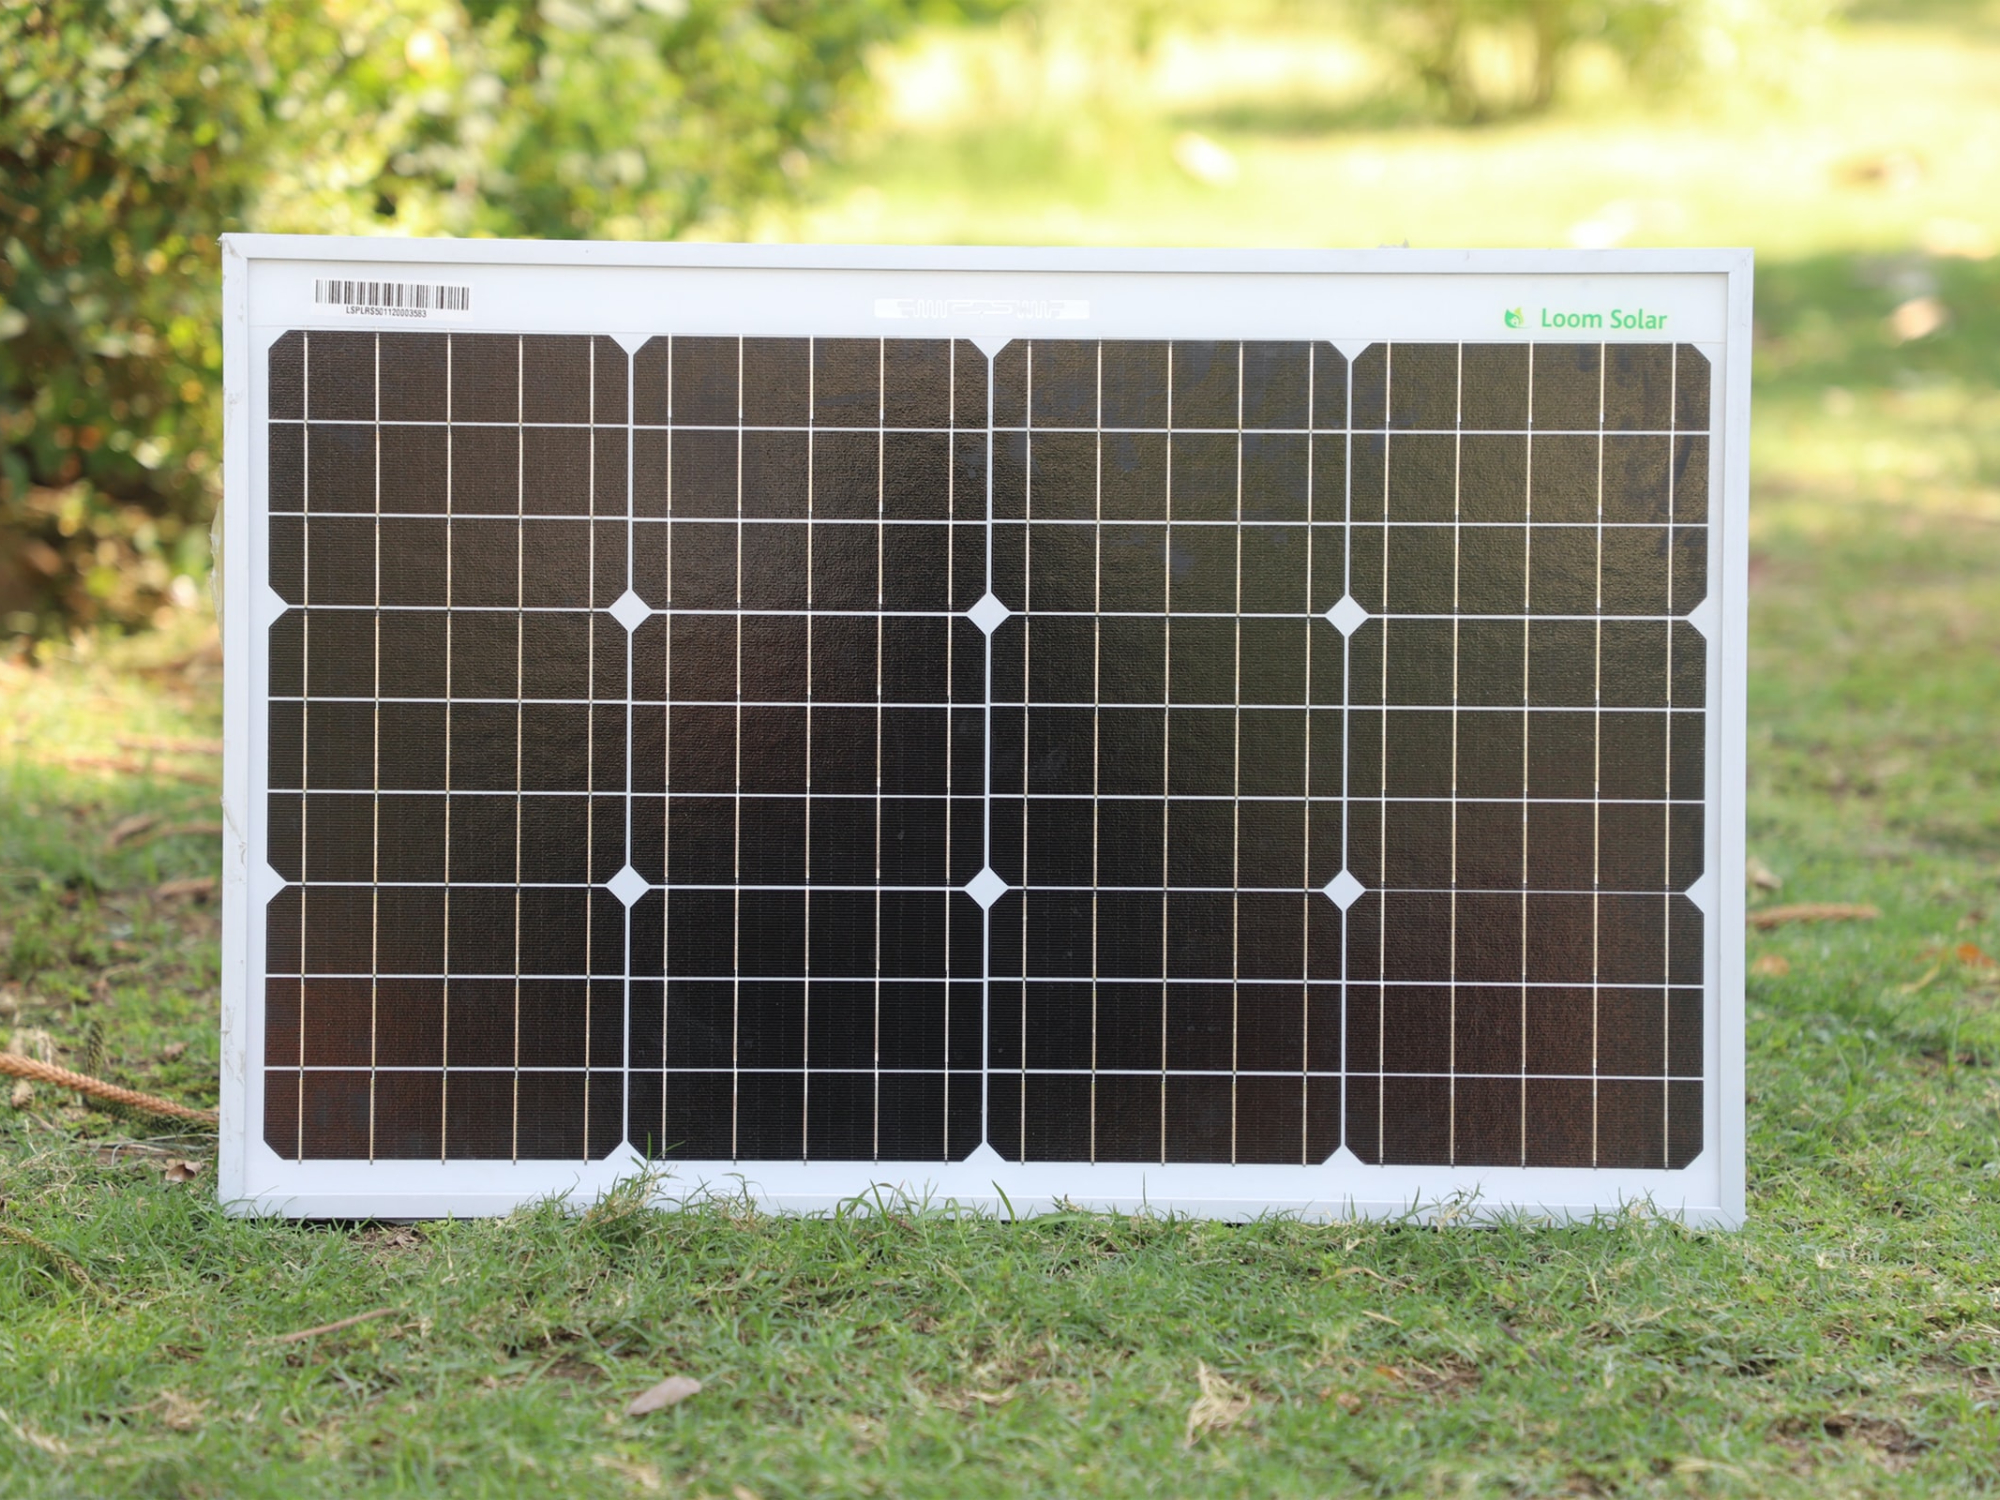 Everything to consider before buying a portable solar panel